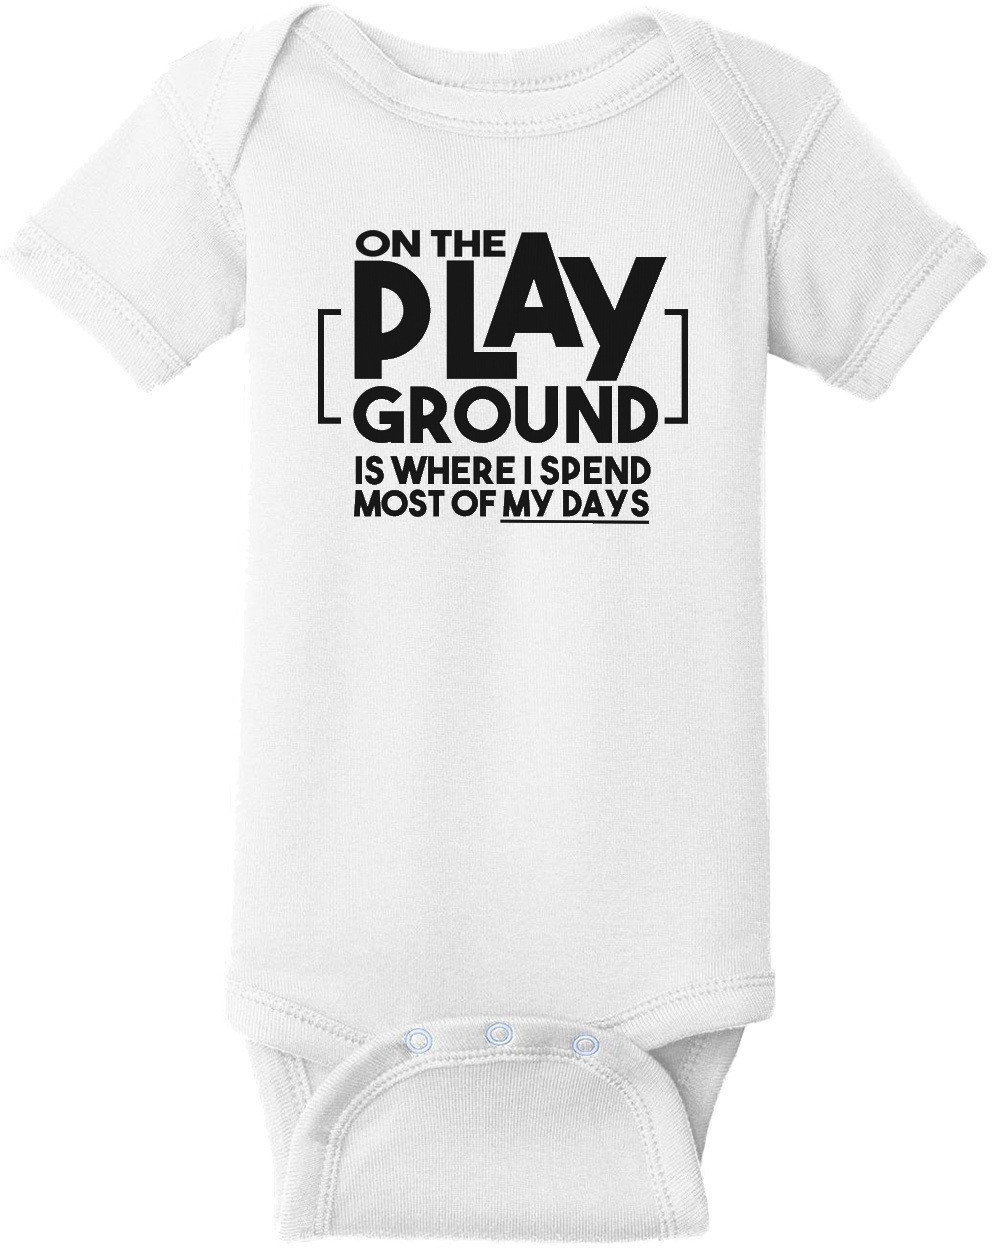 On the play ground is where I spend most of my days - funny kid's t-shirt